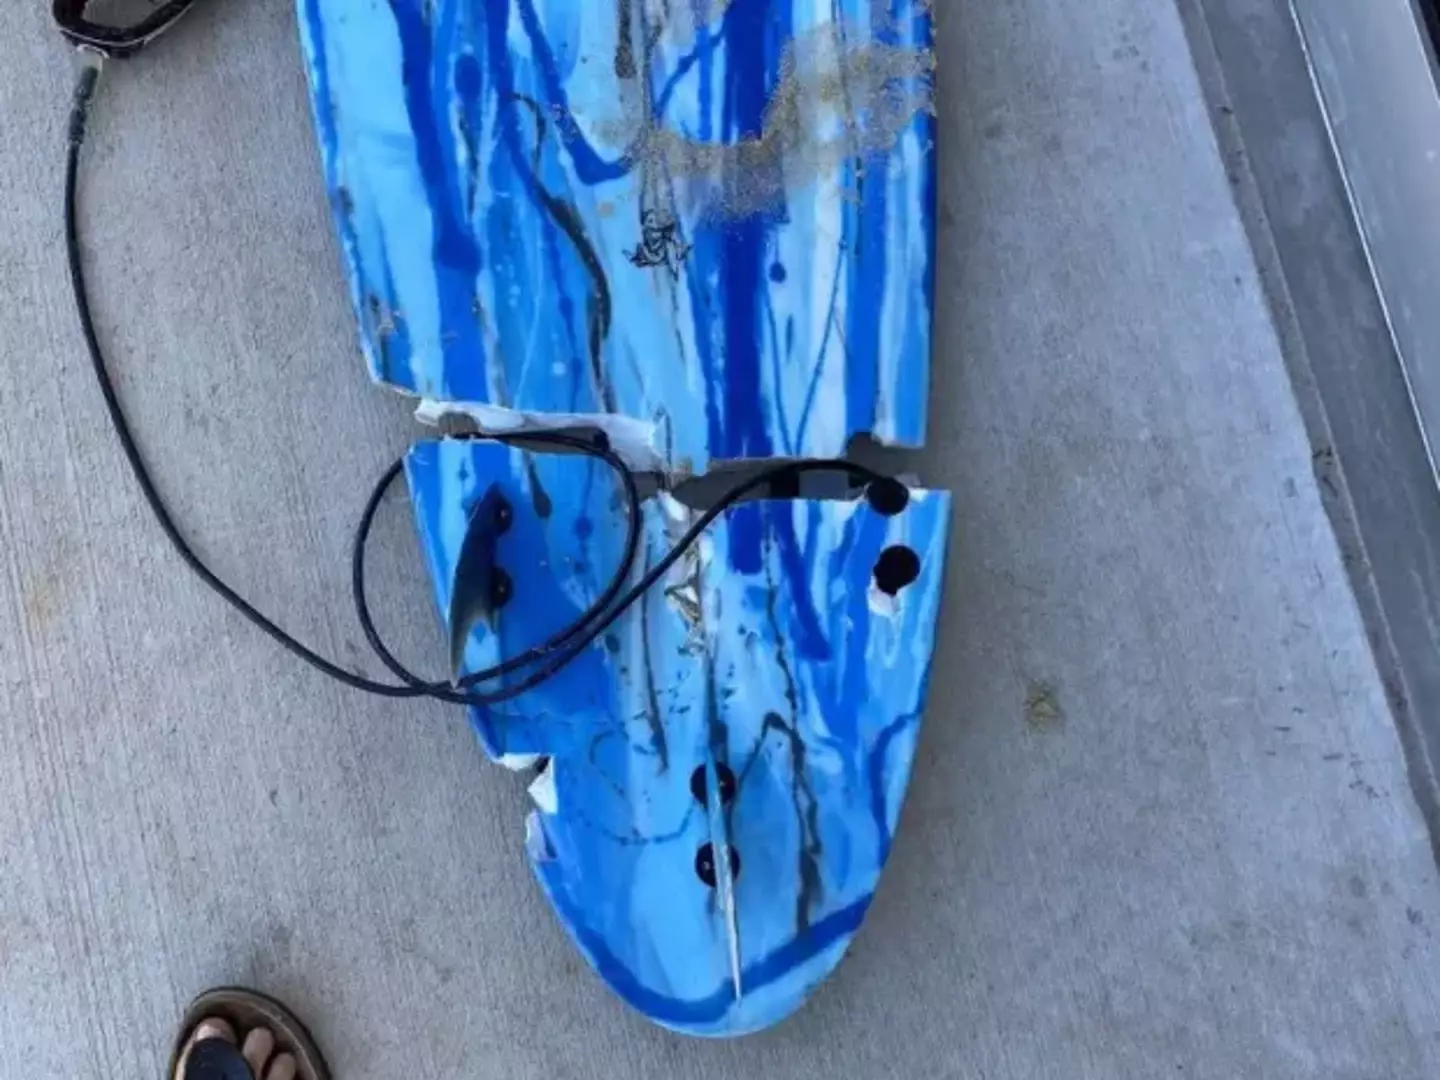 Begg's board was bitten in half during the attack.